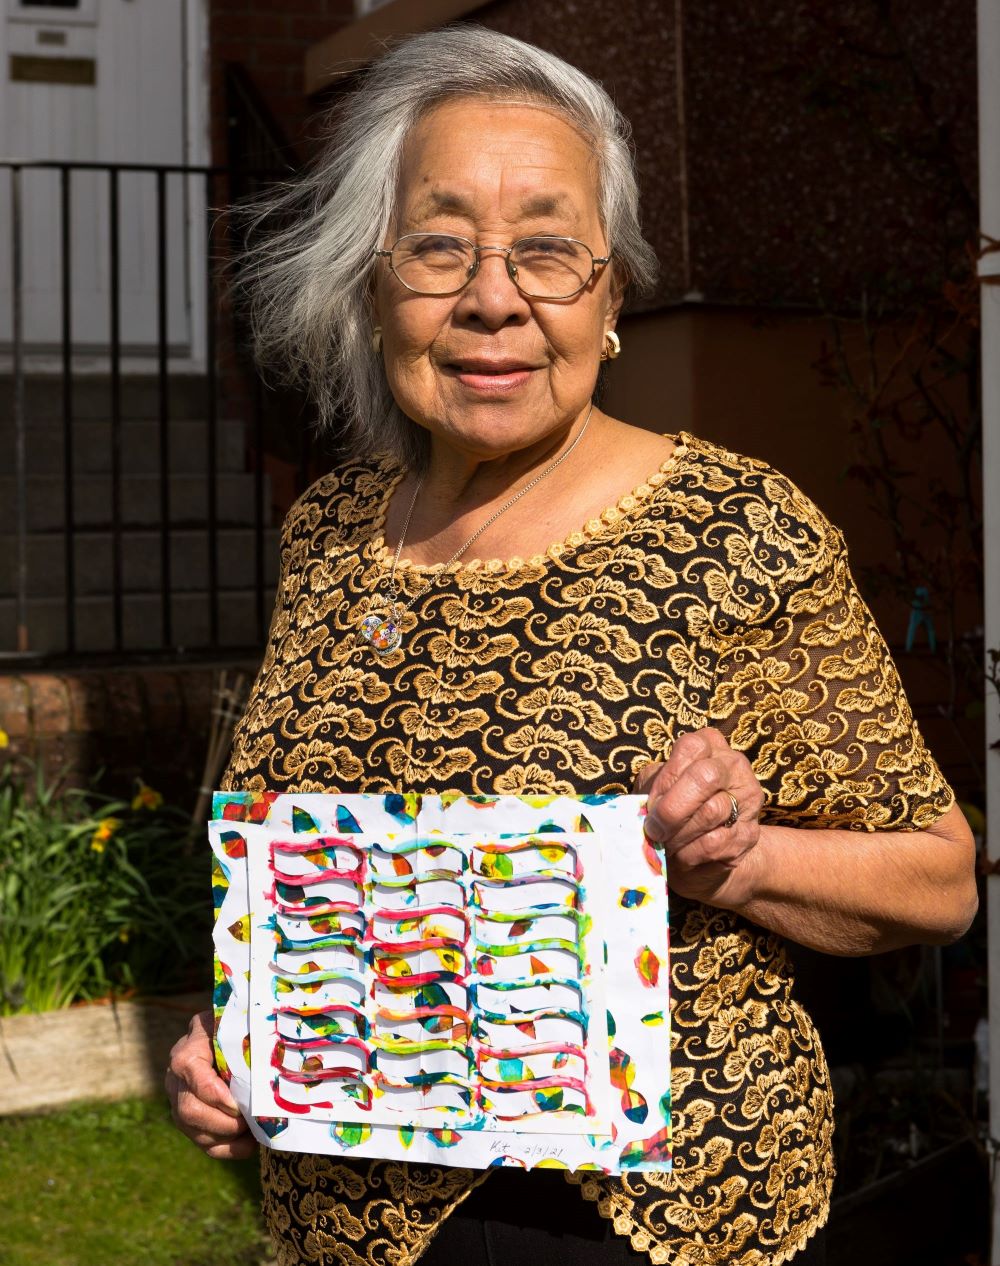 An elderly lady holding the artwork she created